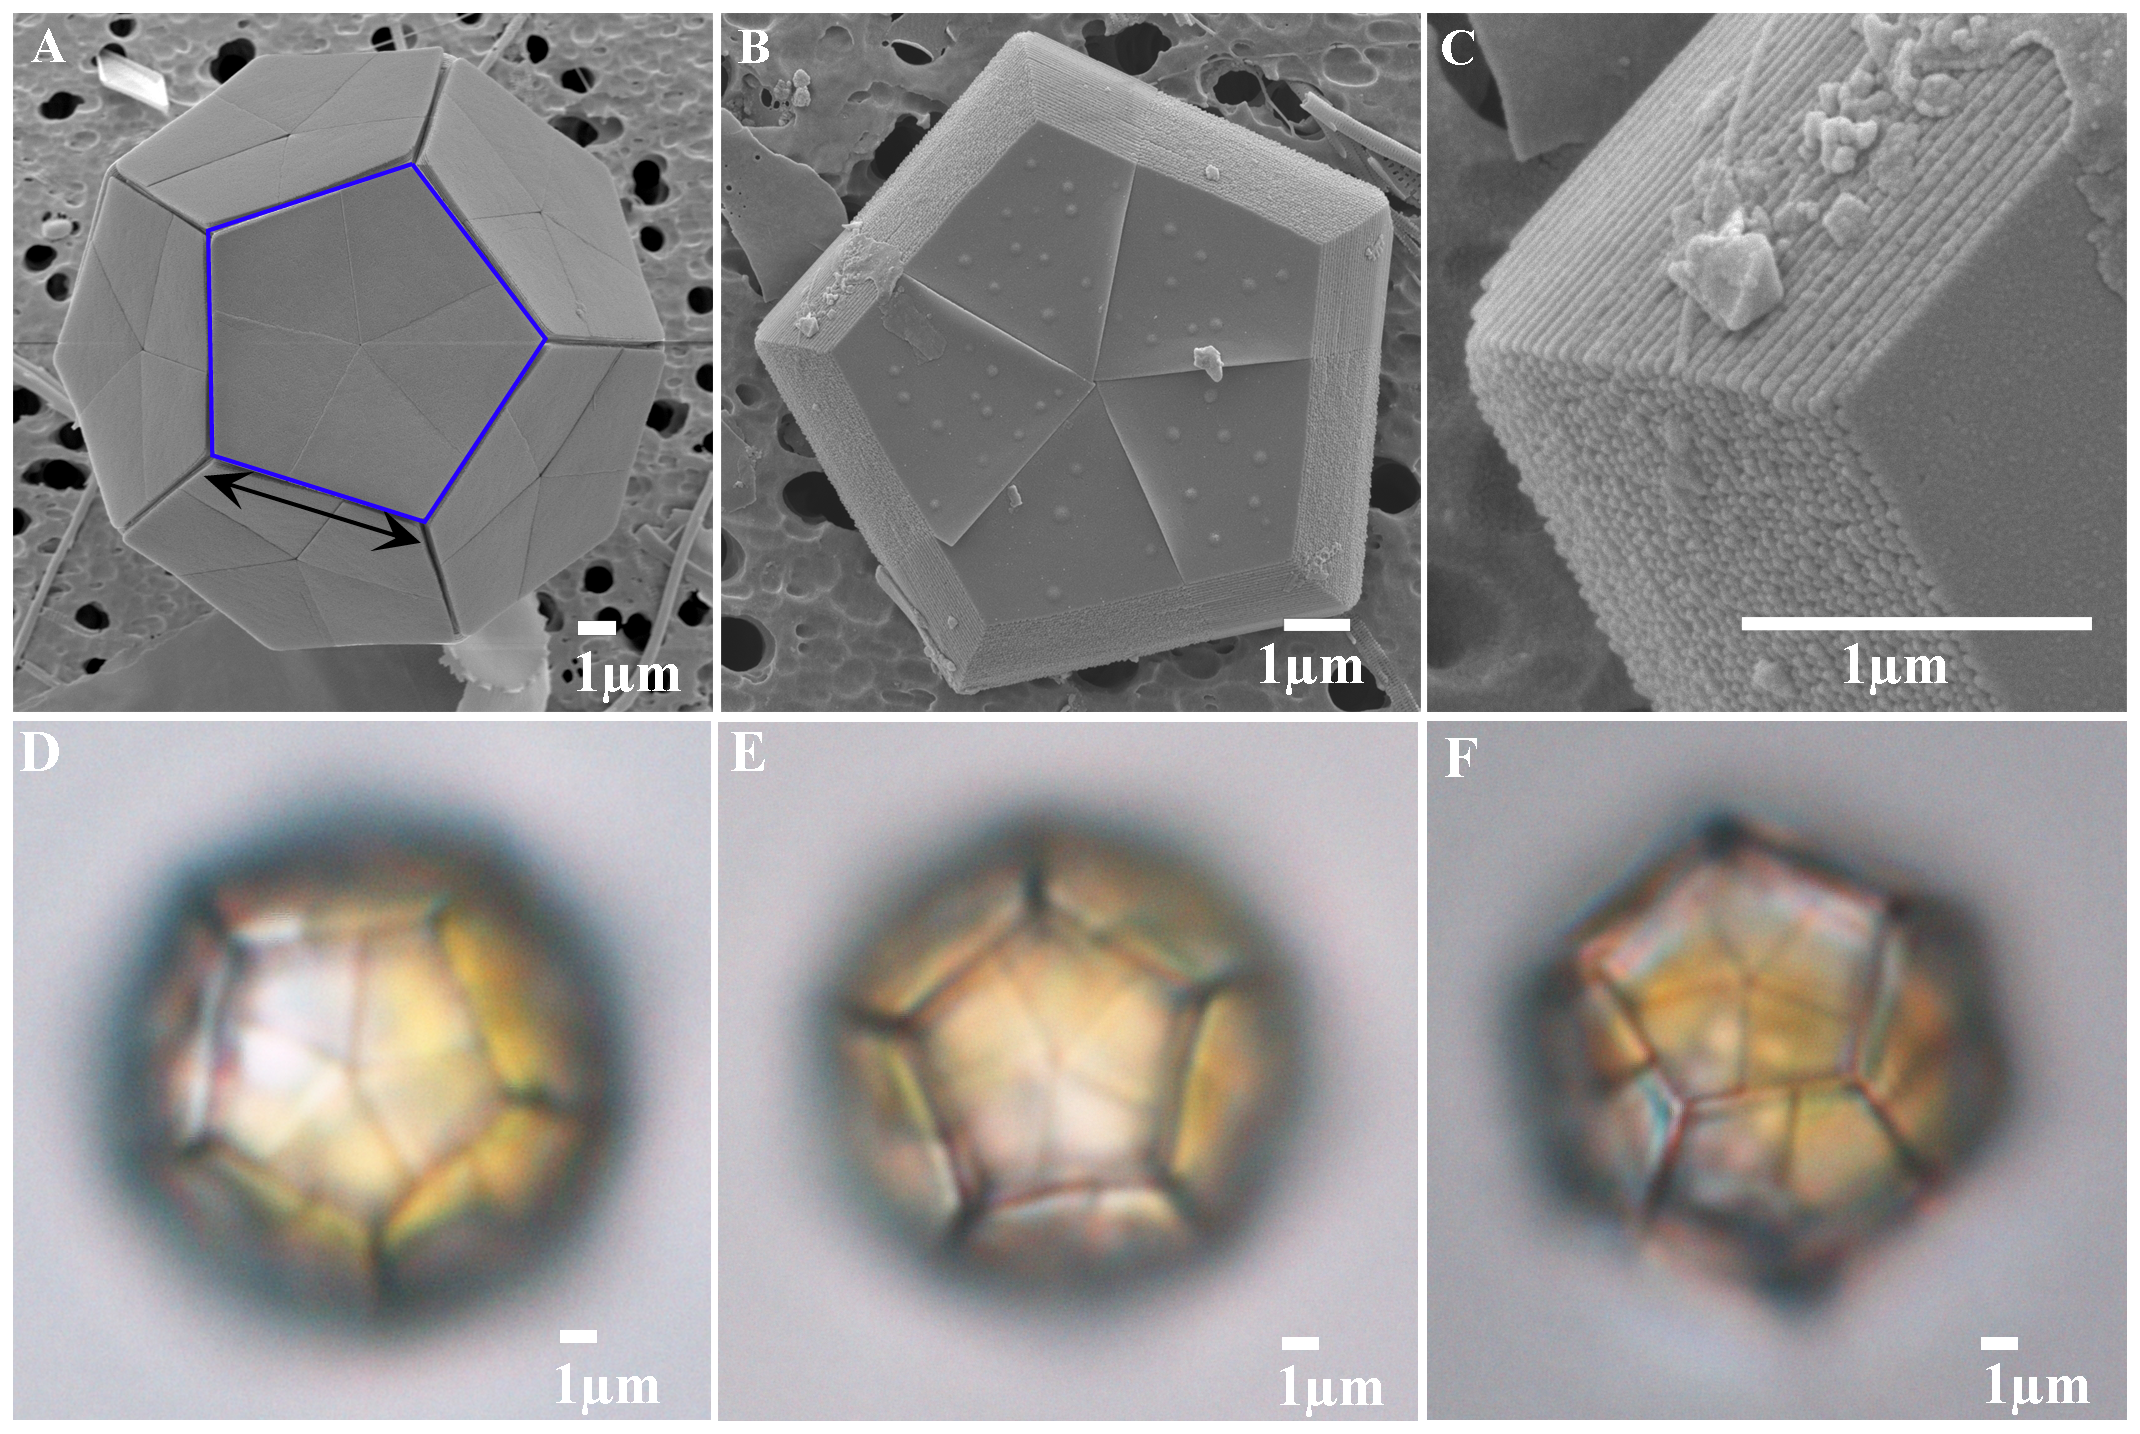 (A) SEM image of a cell of B. bigelowii surrounded by 12 pentaliths (offshore Tomari, 17th June 2012). A pentalith (calcareous scale of the Braarudosphaeraceae) indicated by the blue open pentagon consists of five trapezoidal segments. Black arrow indicates ‘side length of the pentalith’ where the measurements were conducted. (B). SEM image of pentalith of B. bigelowii (proximal side) (offshore Tomari, 17th June 2012). (C) Close up of proximal side of a pentalith (Fig. 1B) showing laminar structure. (D) LM image of specimen TMR-scBb-1 (E) LM image of specimen TMR-scBb-7. (F) LM image of specimen TMR-scBb-8. 